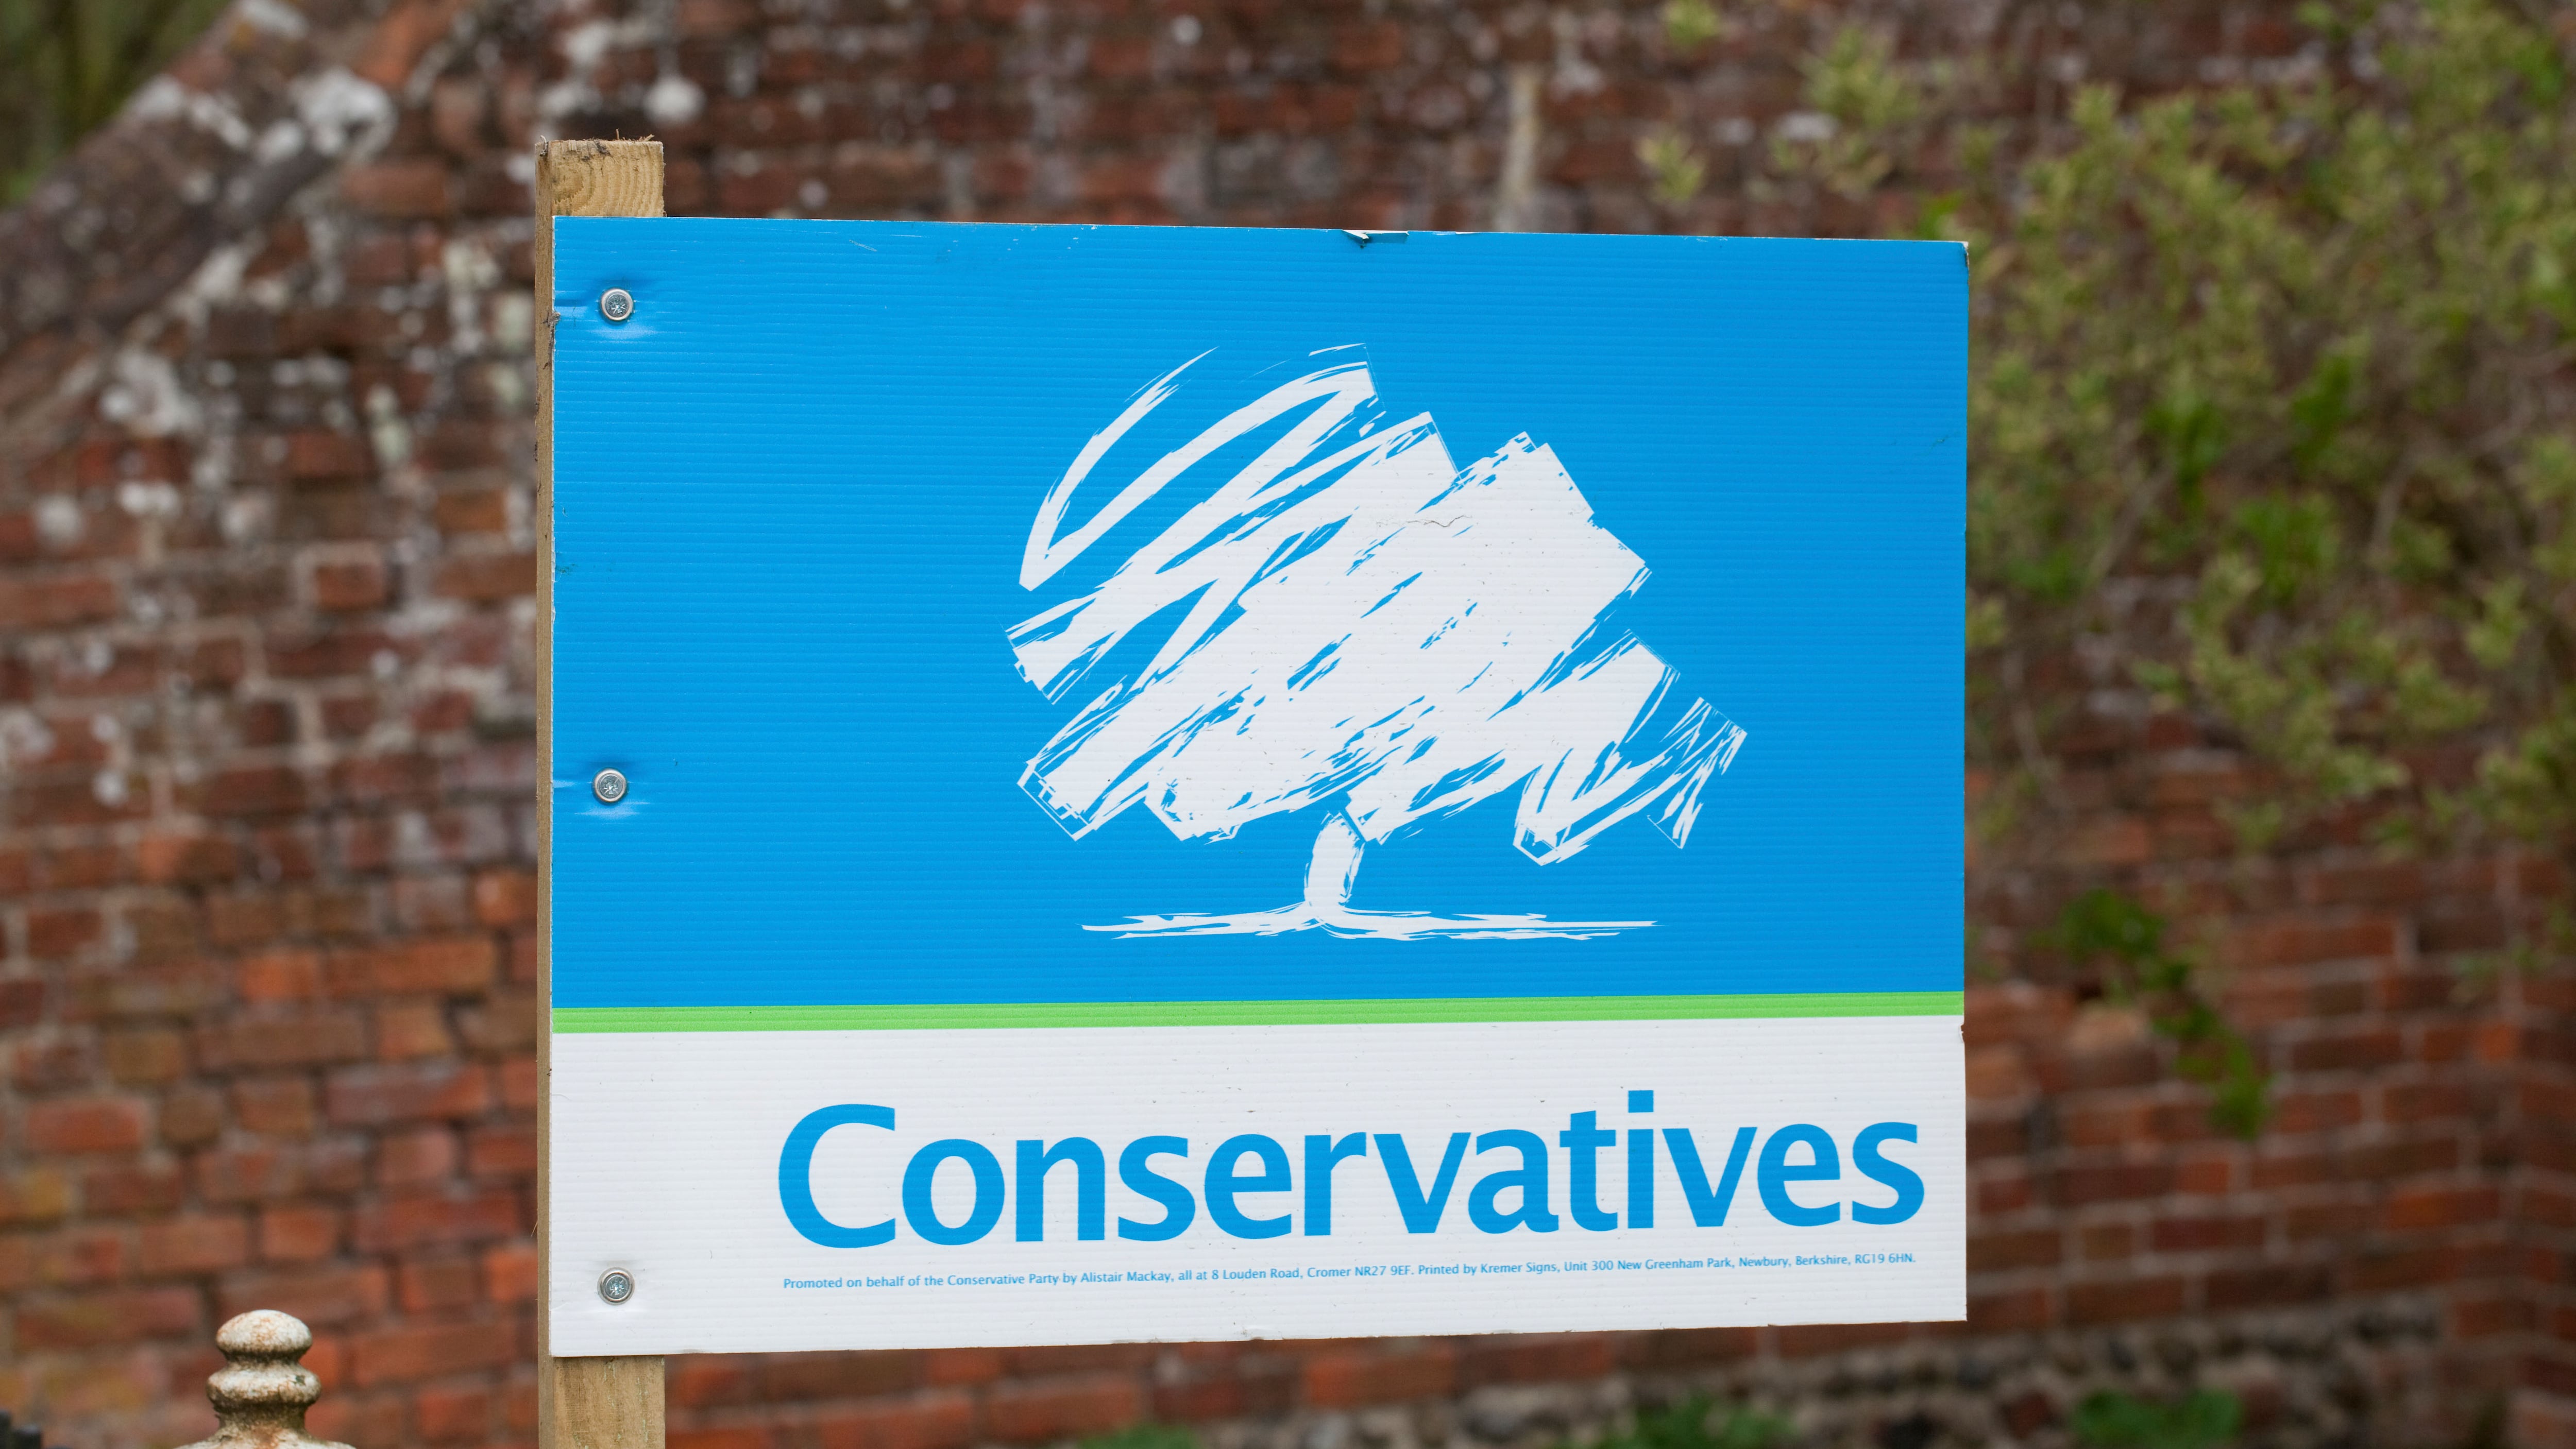 The Tories could be in danger of extinction in some parts of the UK, according to latest polling